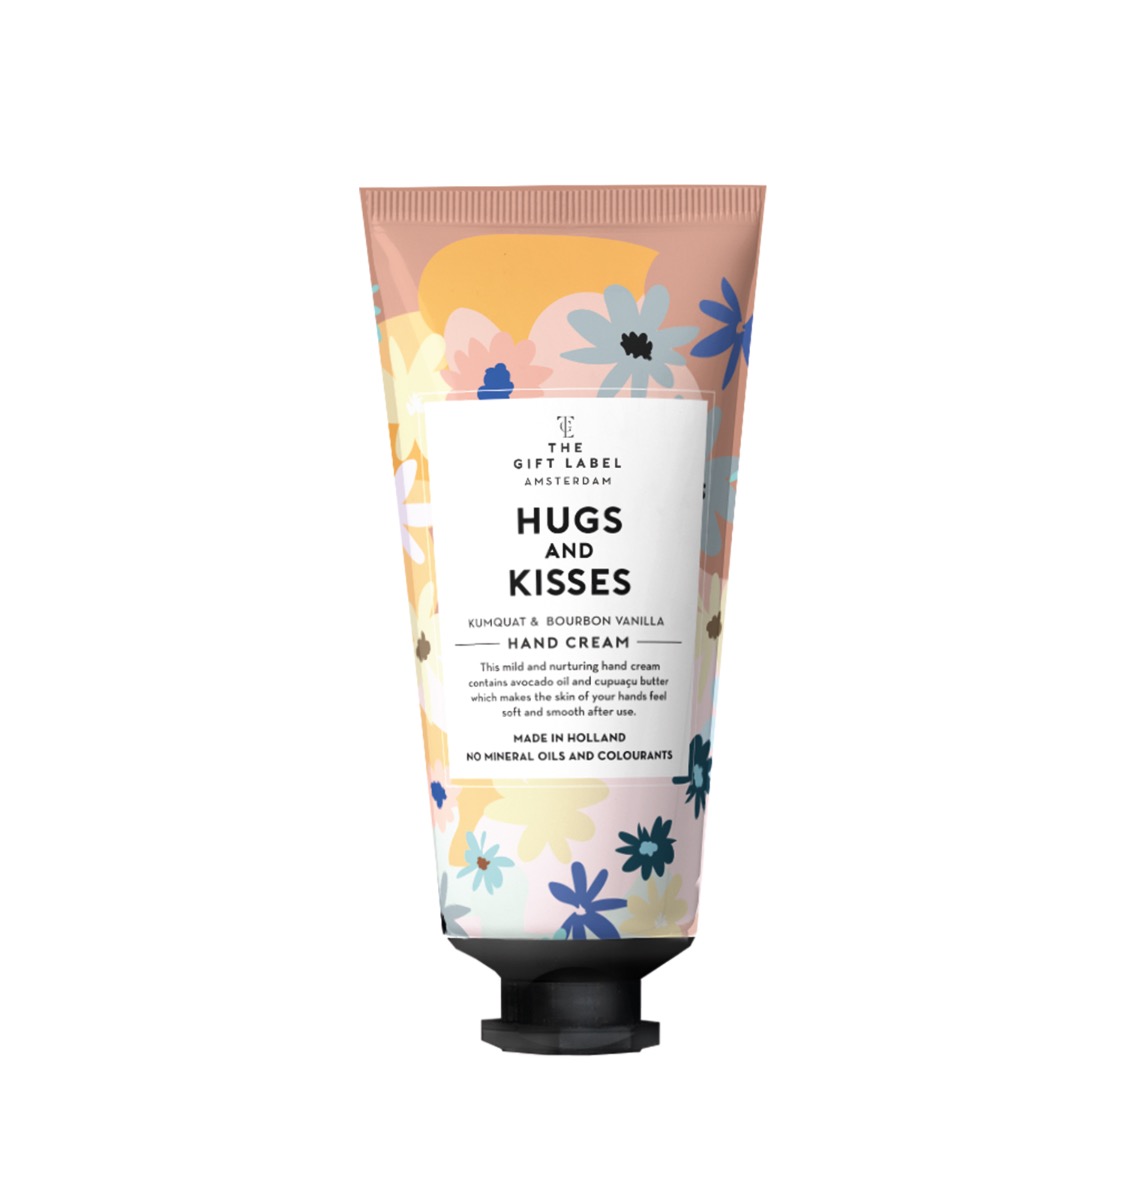 HAND CREAM "HUGS AND KISSES" - THE GIFT LABEL